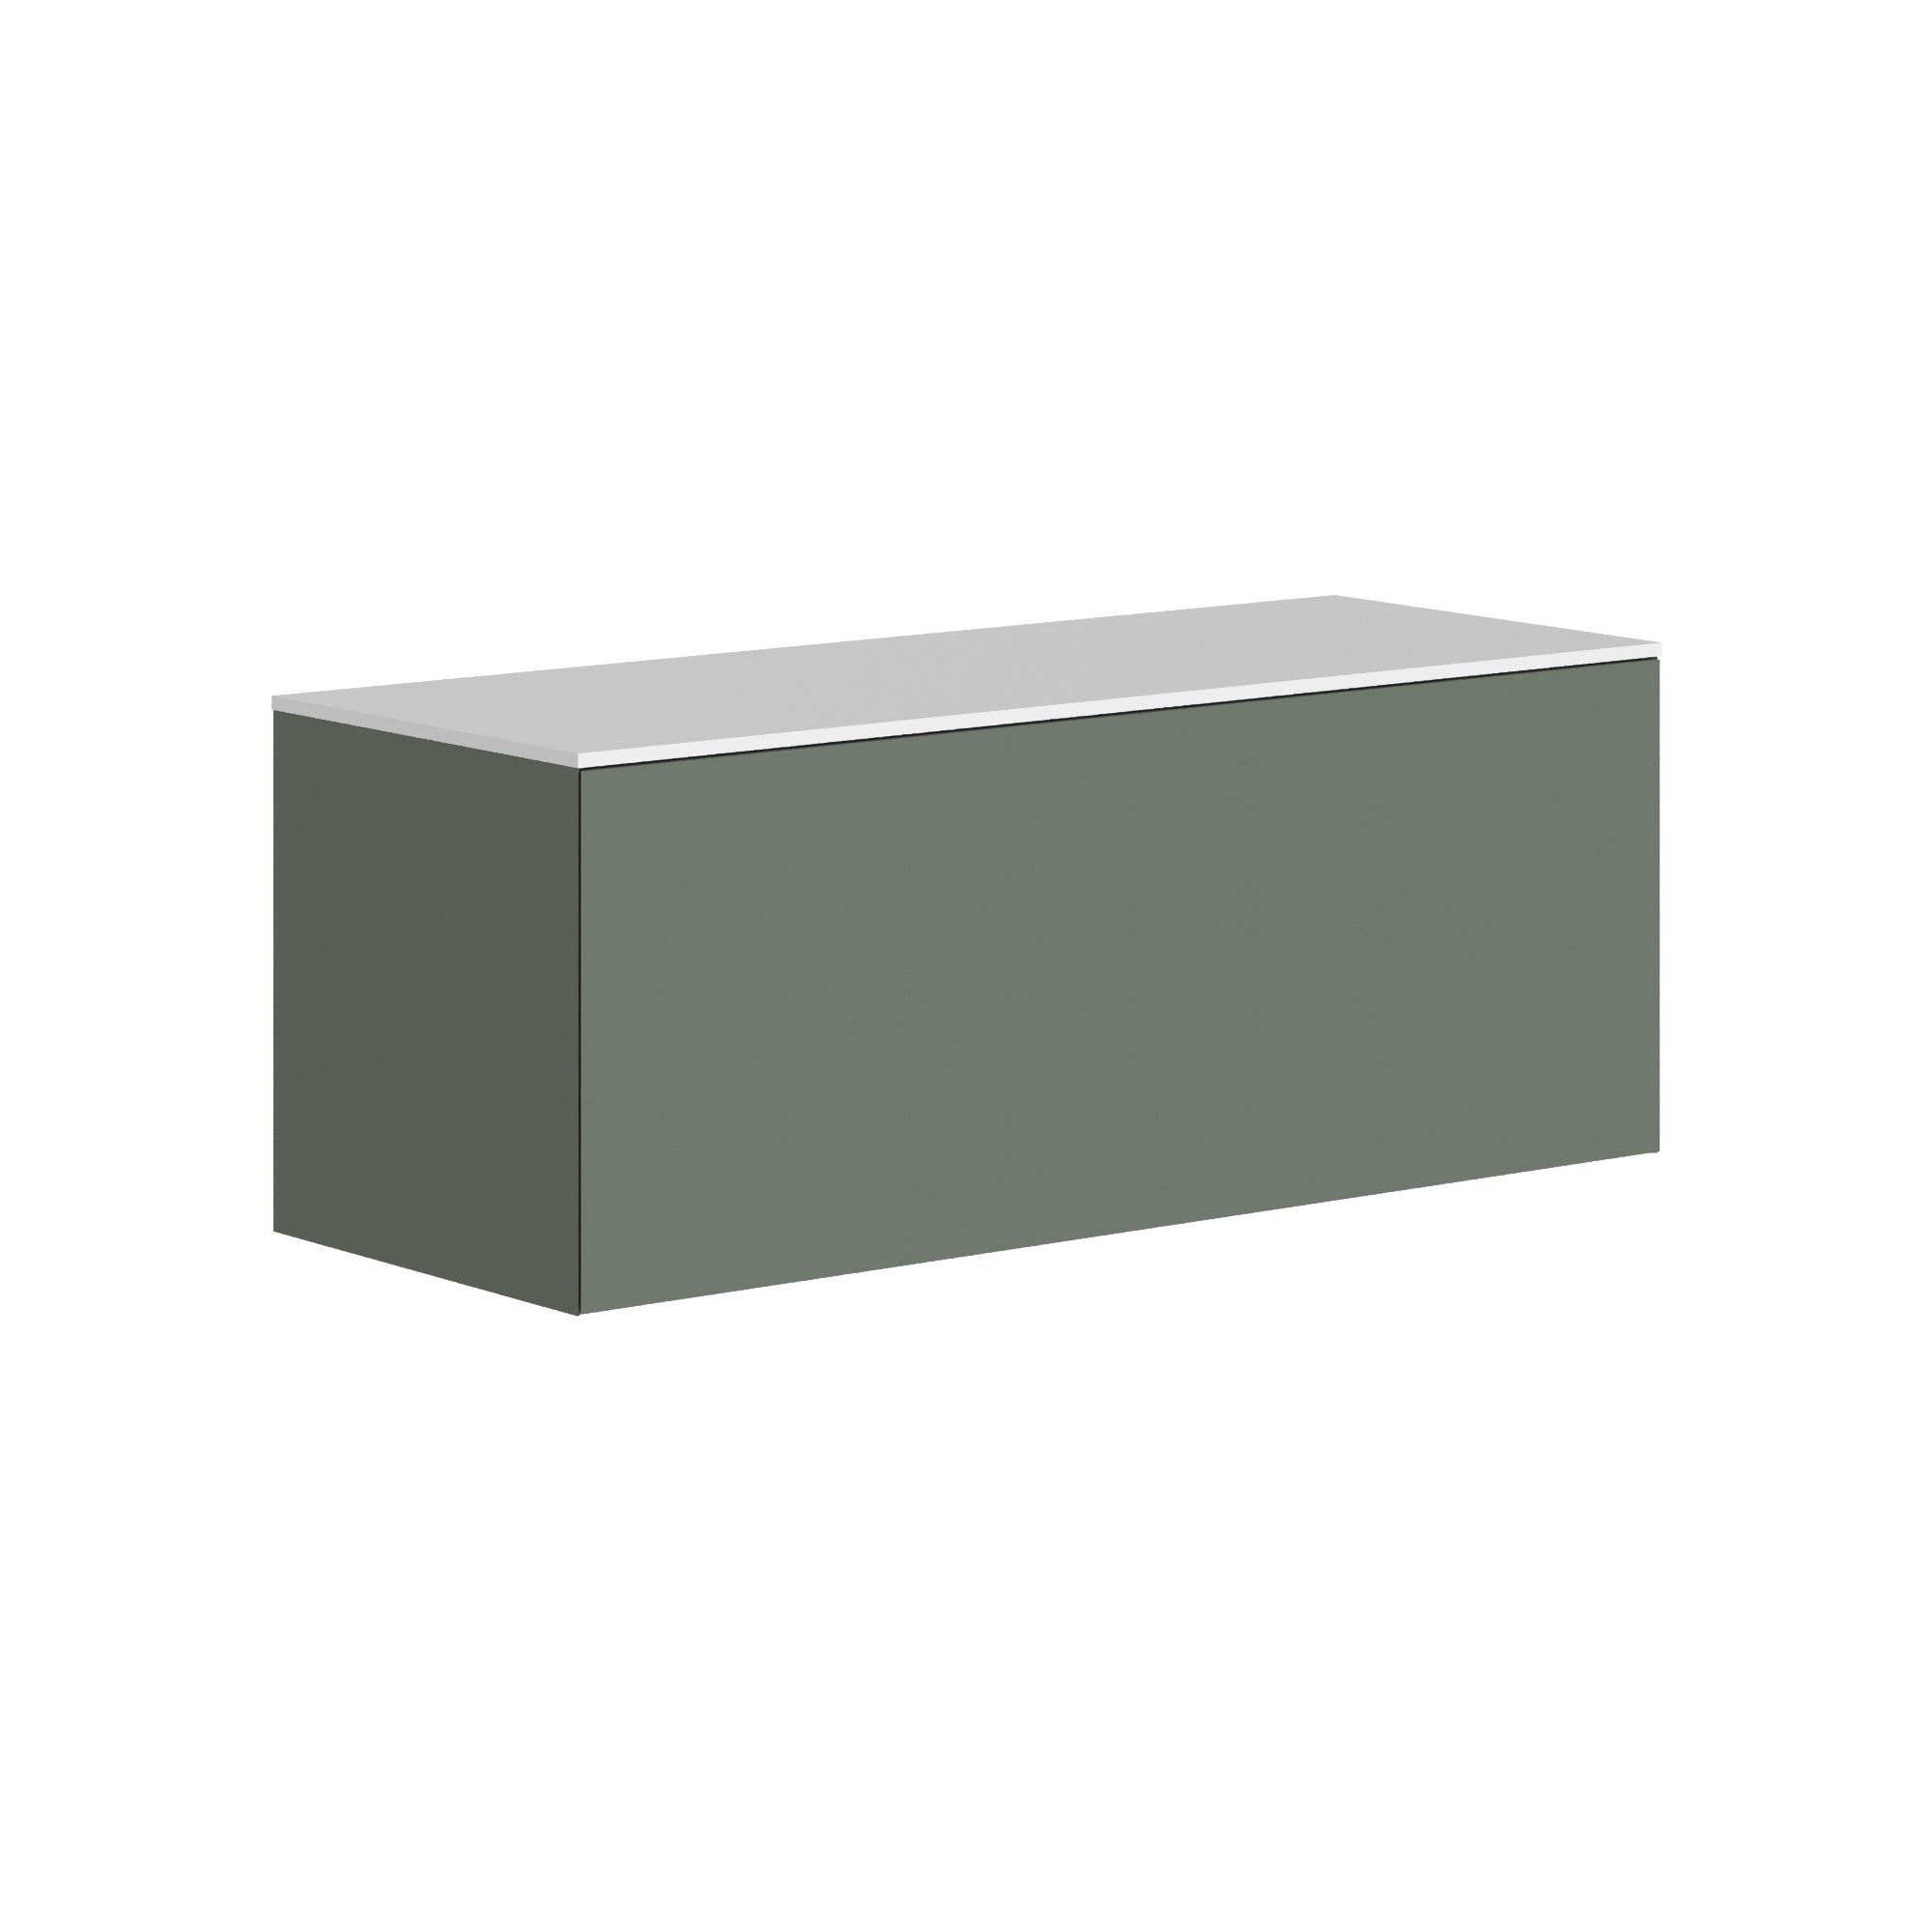 The Ellery Auxiliary Push Open Unit 1200x450mm with Solid Surface Countertop